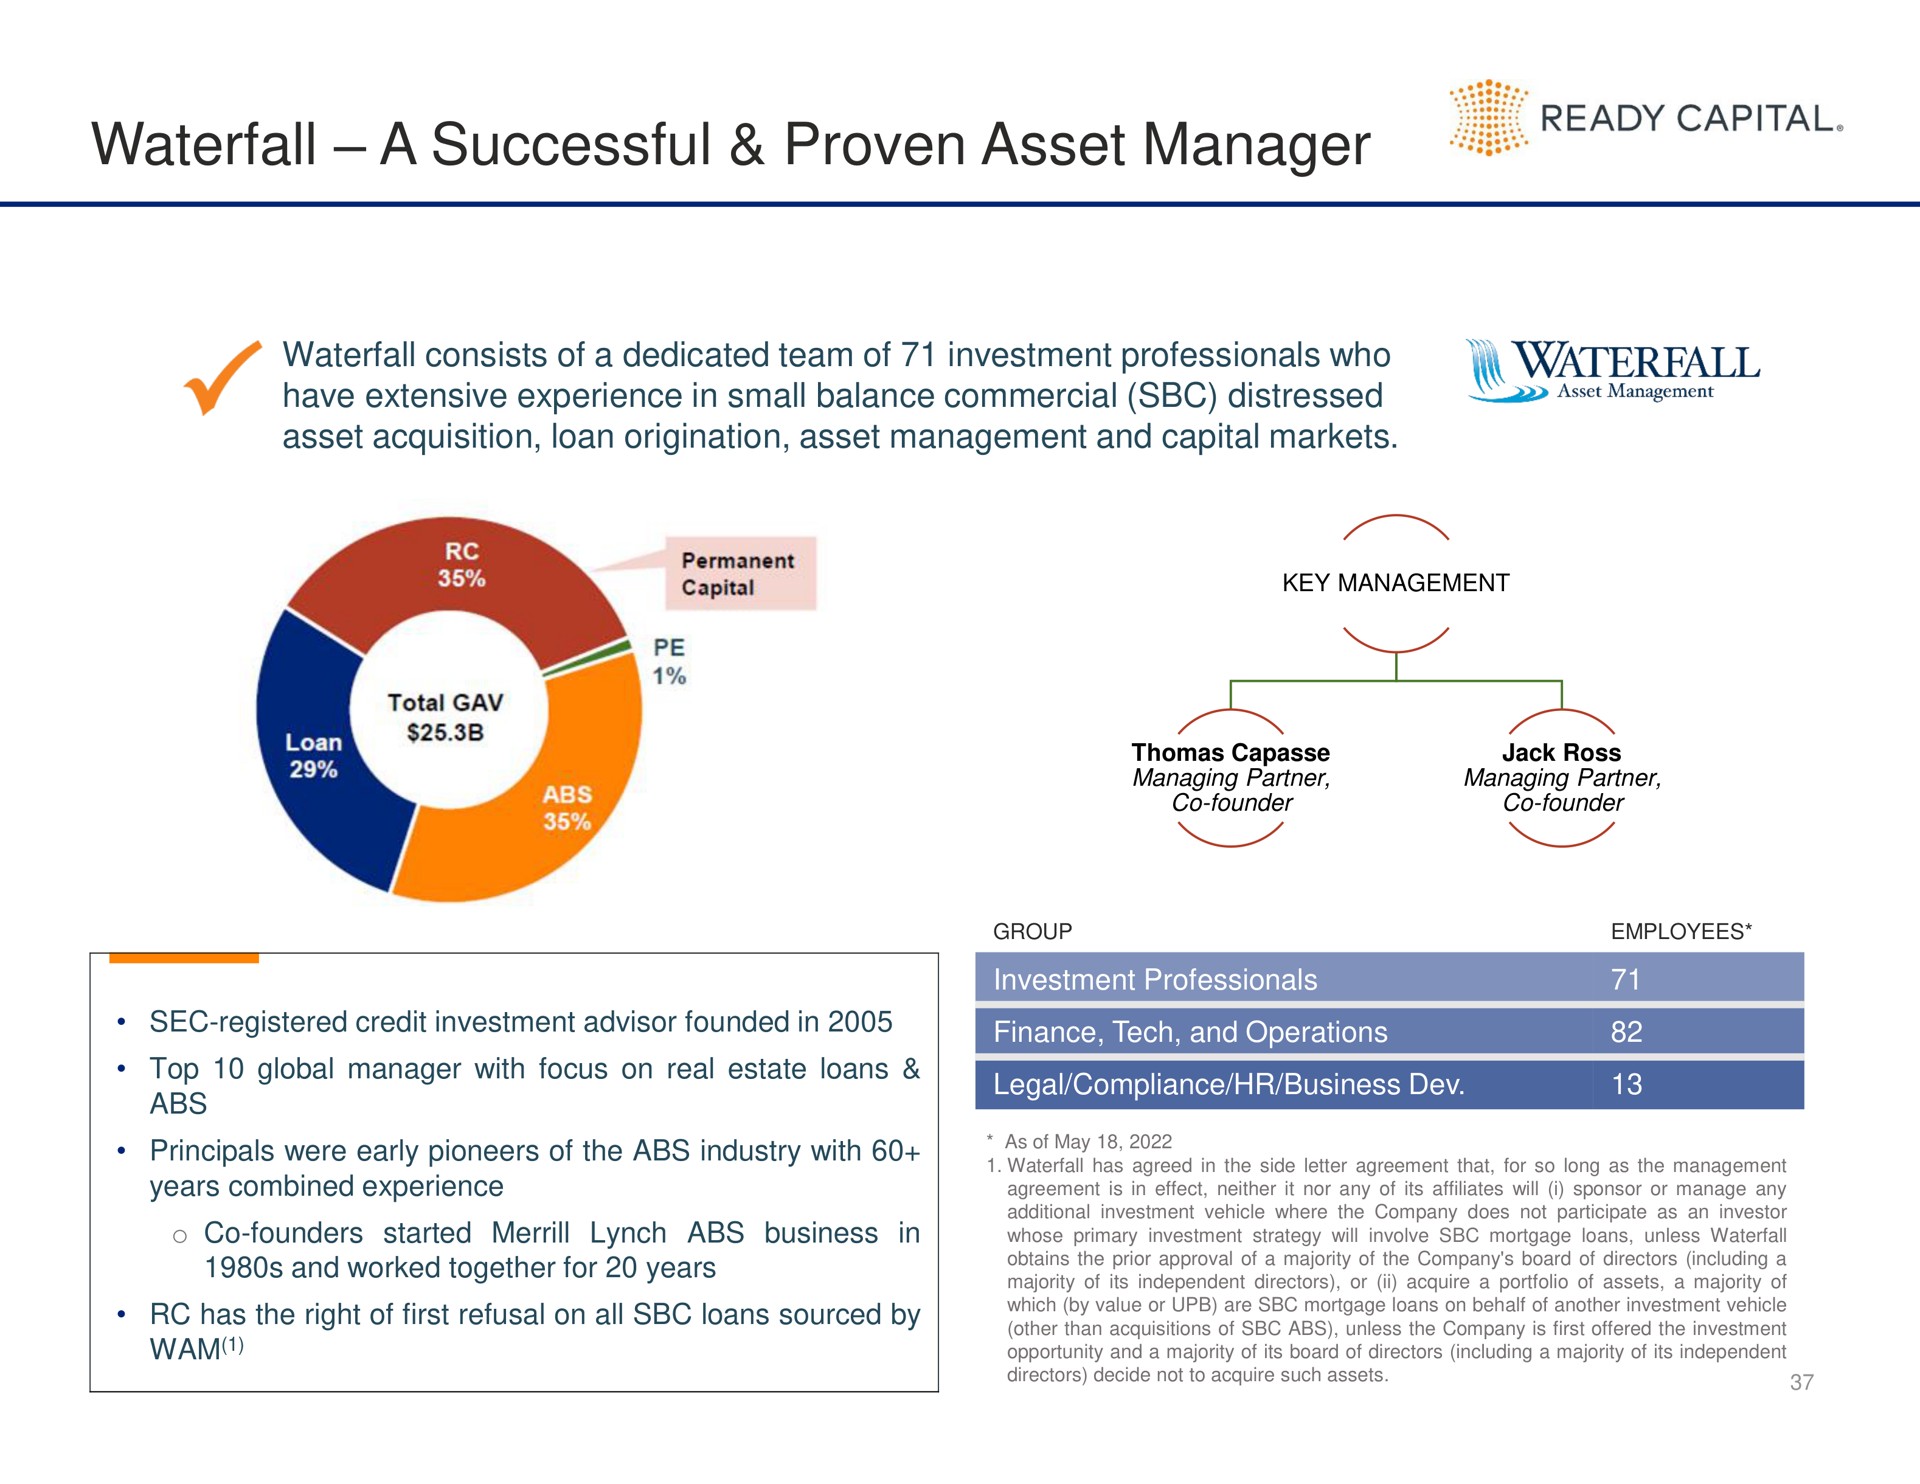 waterfall a successful proven asset manager ready capital mae | Ready Capital